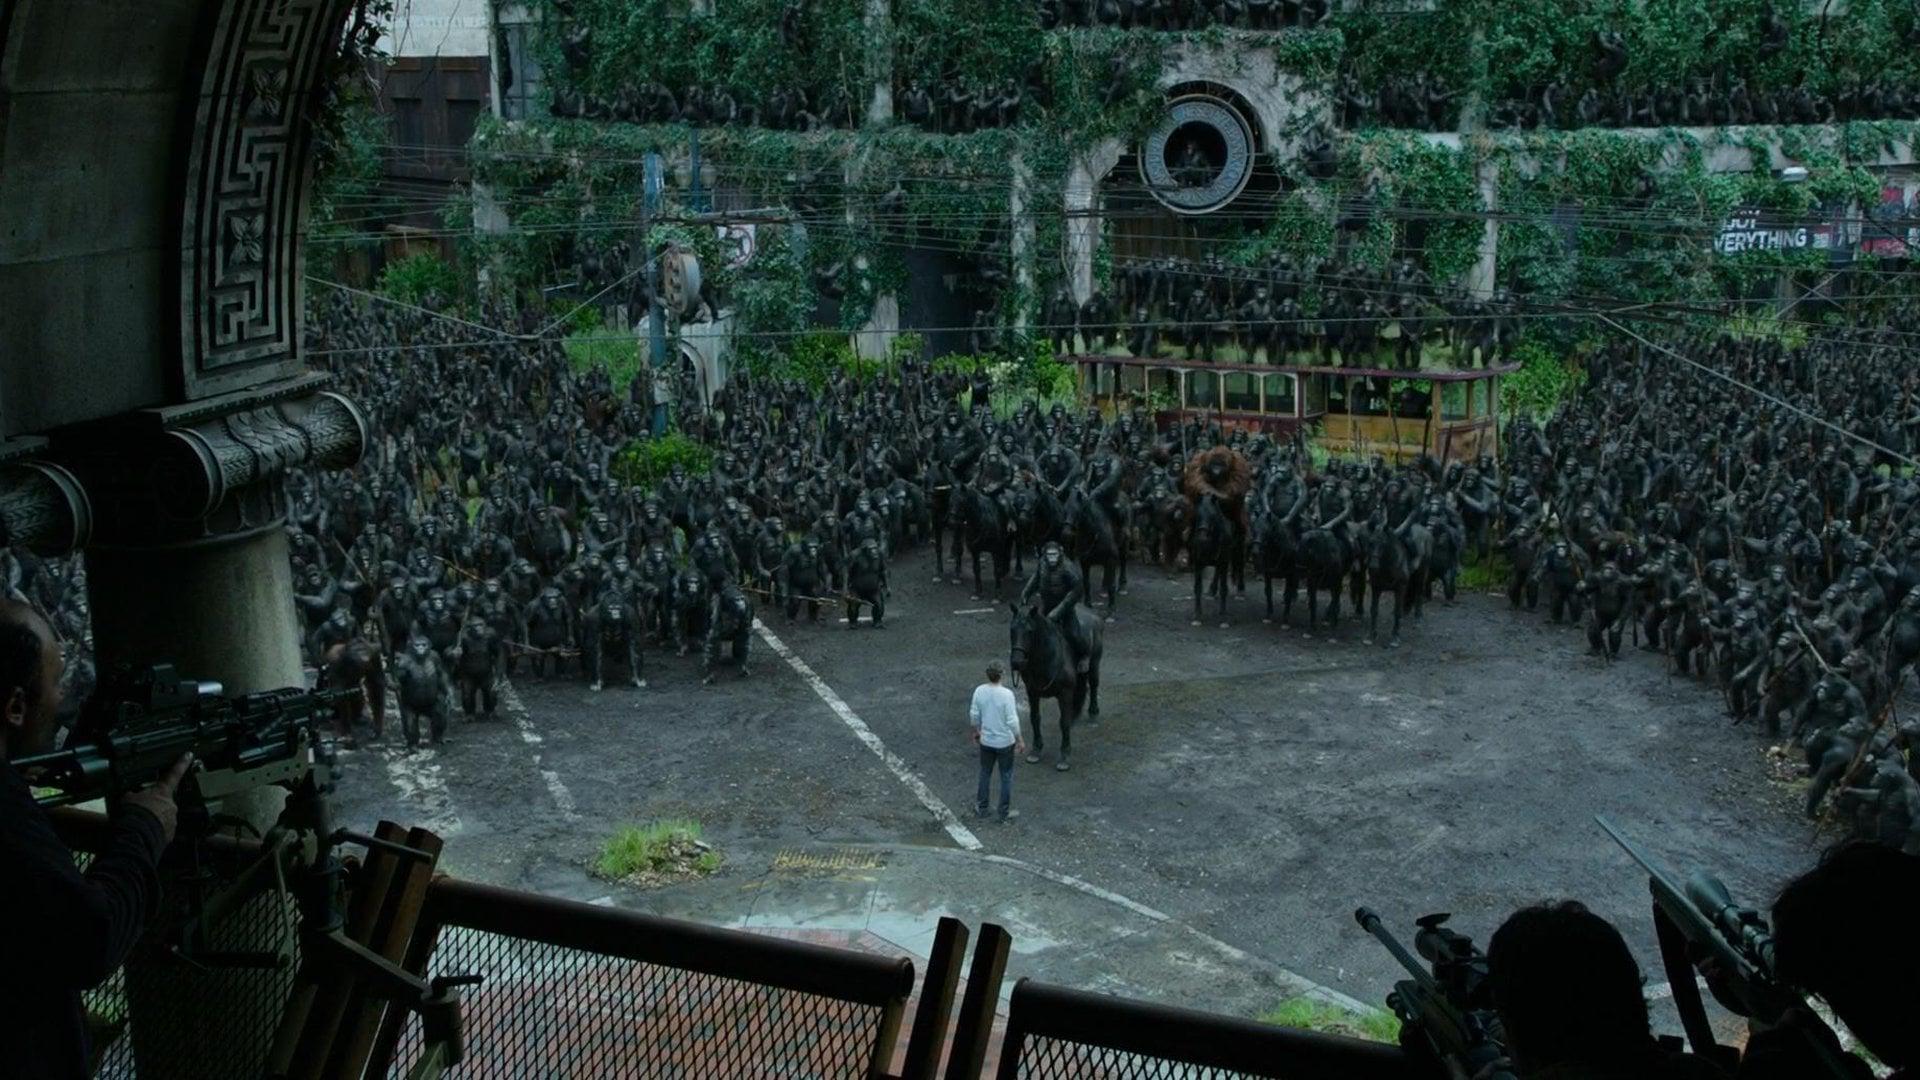 Backdrop Image for Dawn of the Planet of the Apes